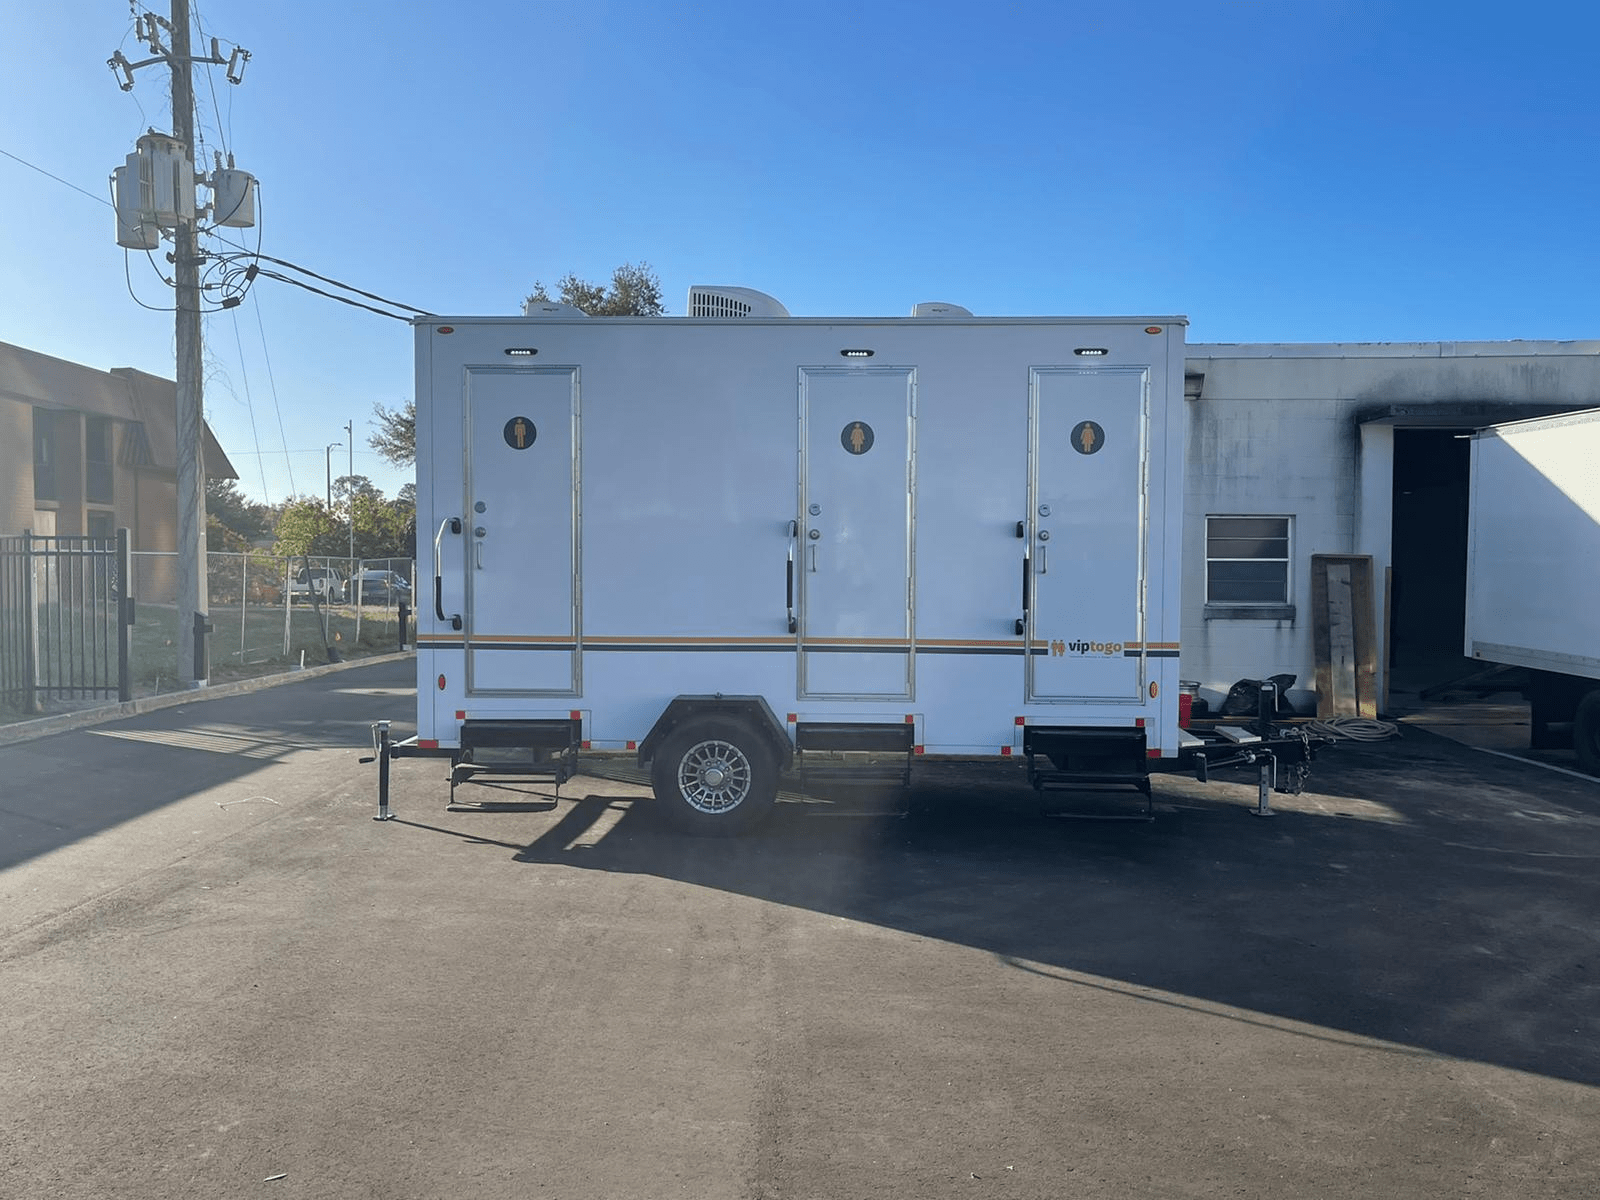 Emergency response restroom trailer at a site